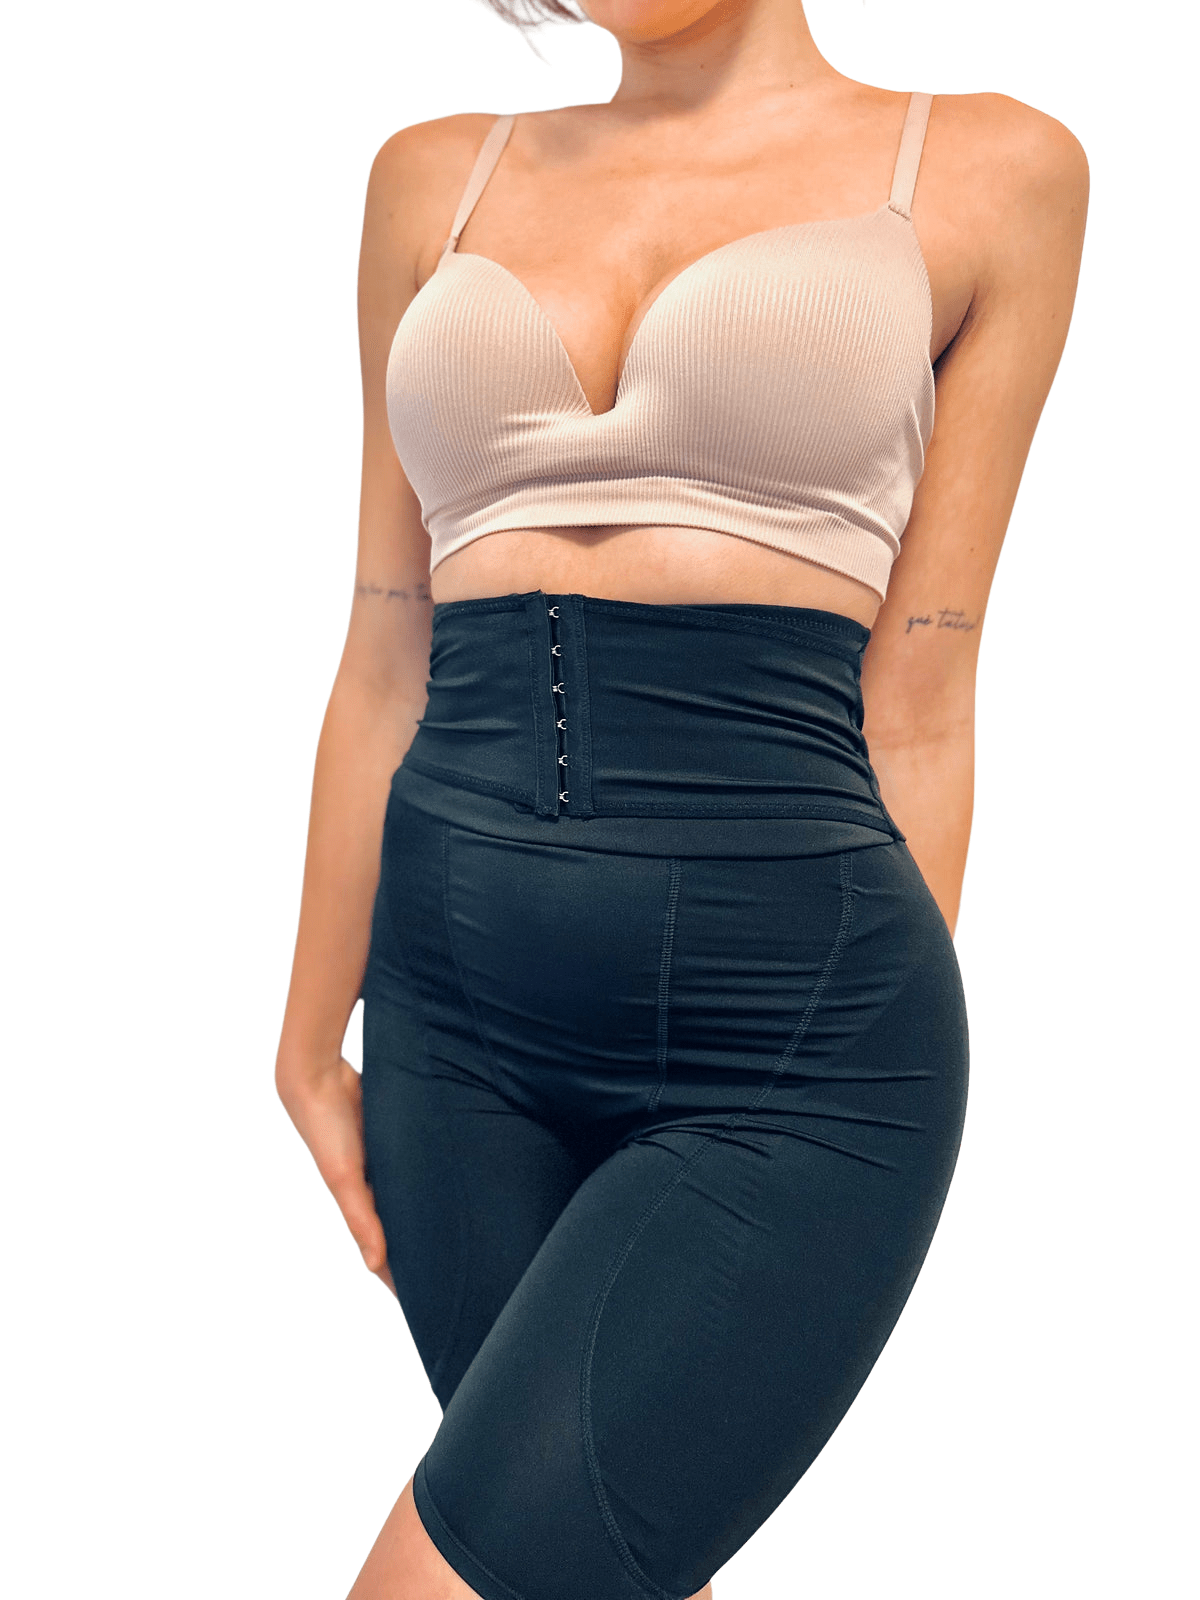 Cocoon Shapewear Women's High-Waist Shaper Boy Shorts - Sculpt Your  Silhouette with Confidence, Black, Small at  Women's Clothing store